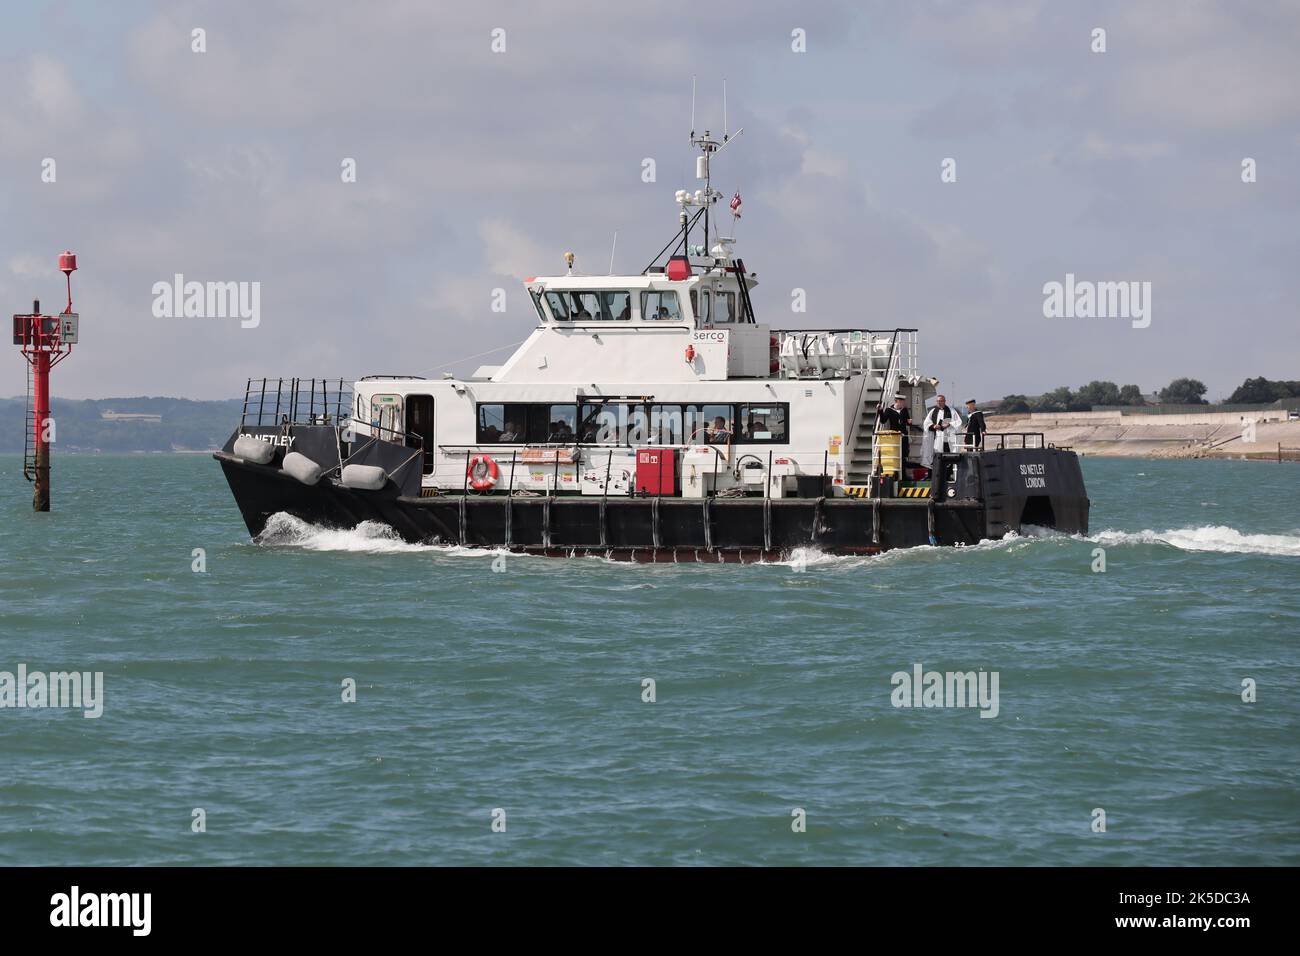 SD NETLEY heading into The Solent. The passenger vessel is operated by Serco Marine Services and serves the Naval Base Stock Photo